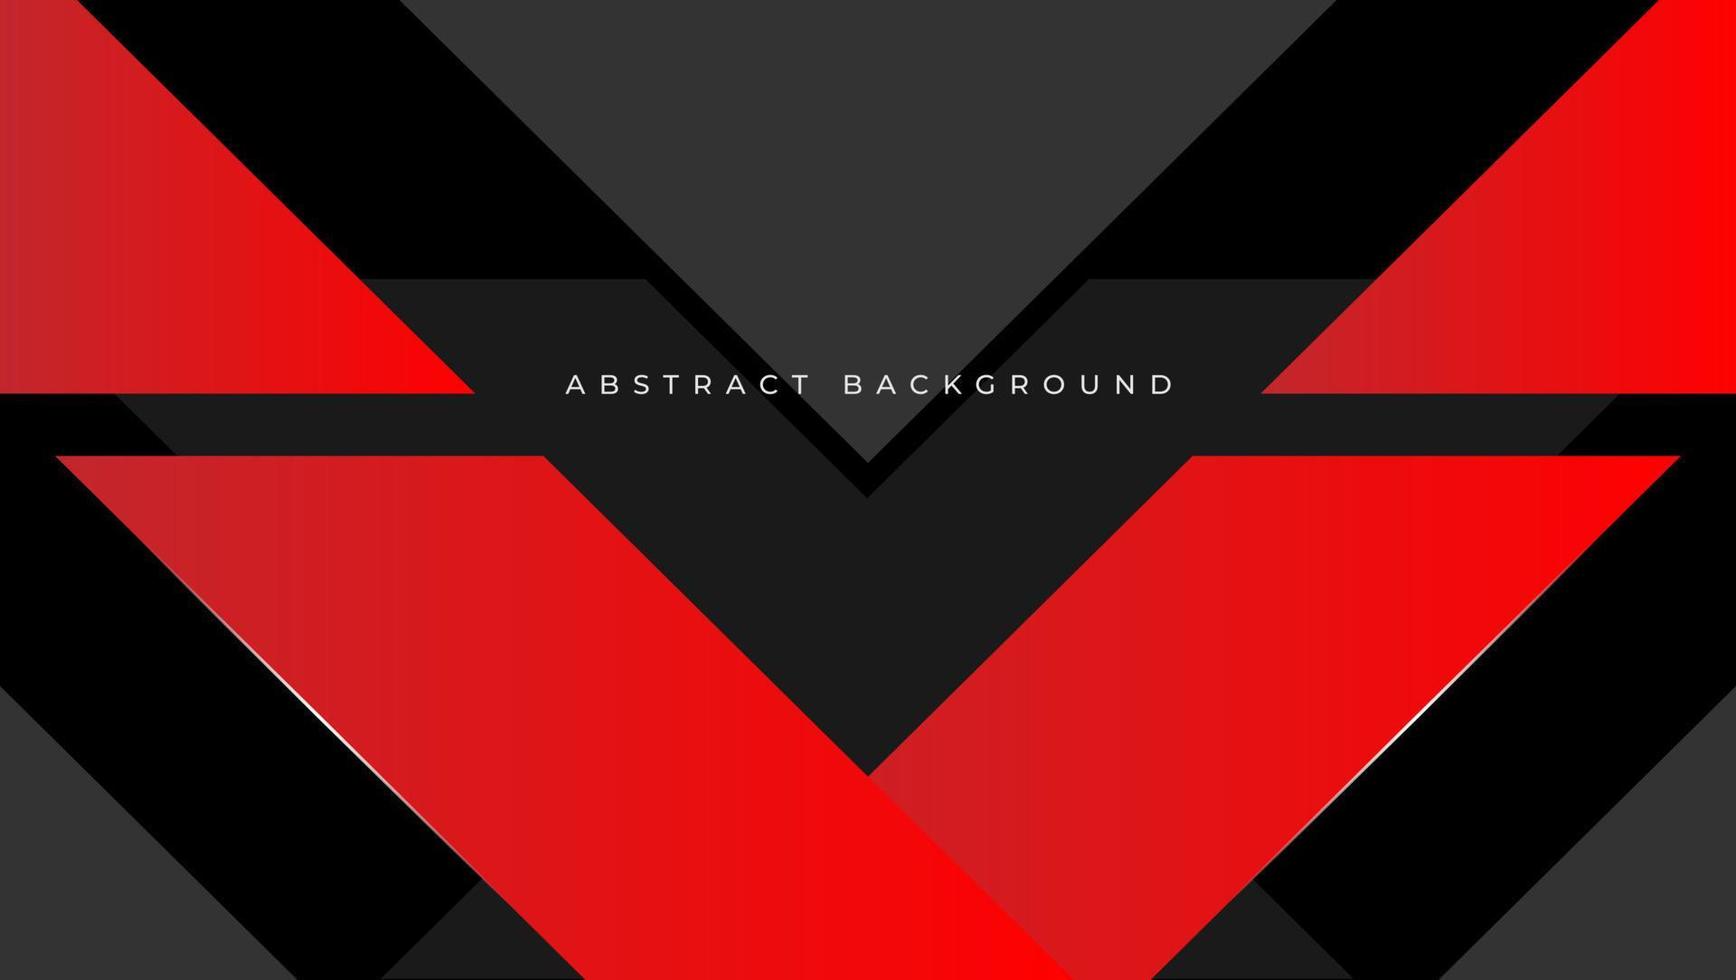 Abstract red and black background vector